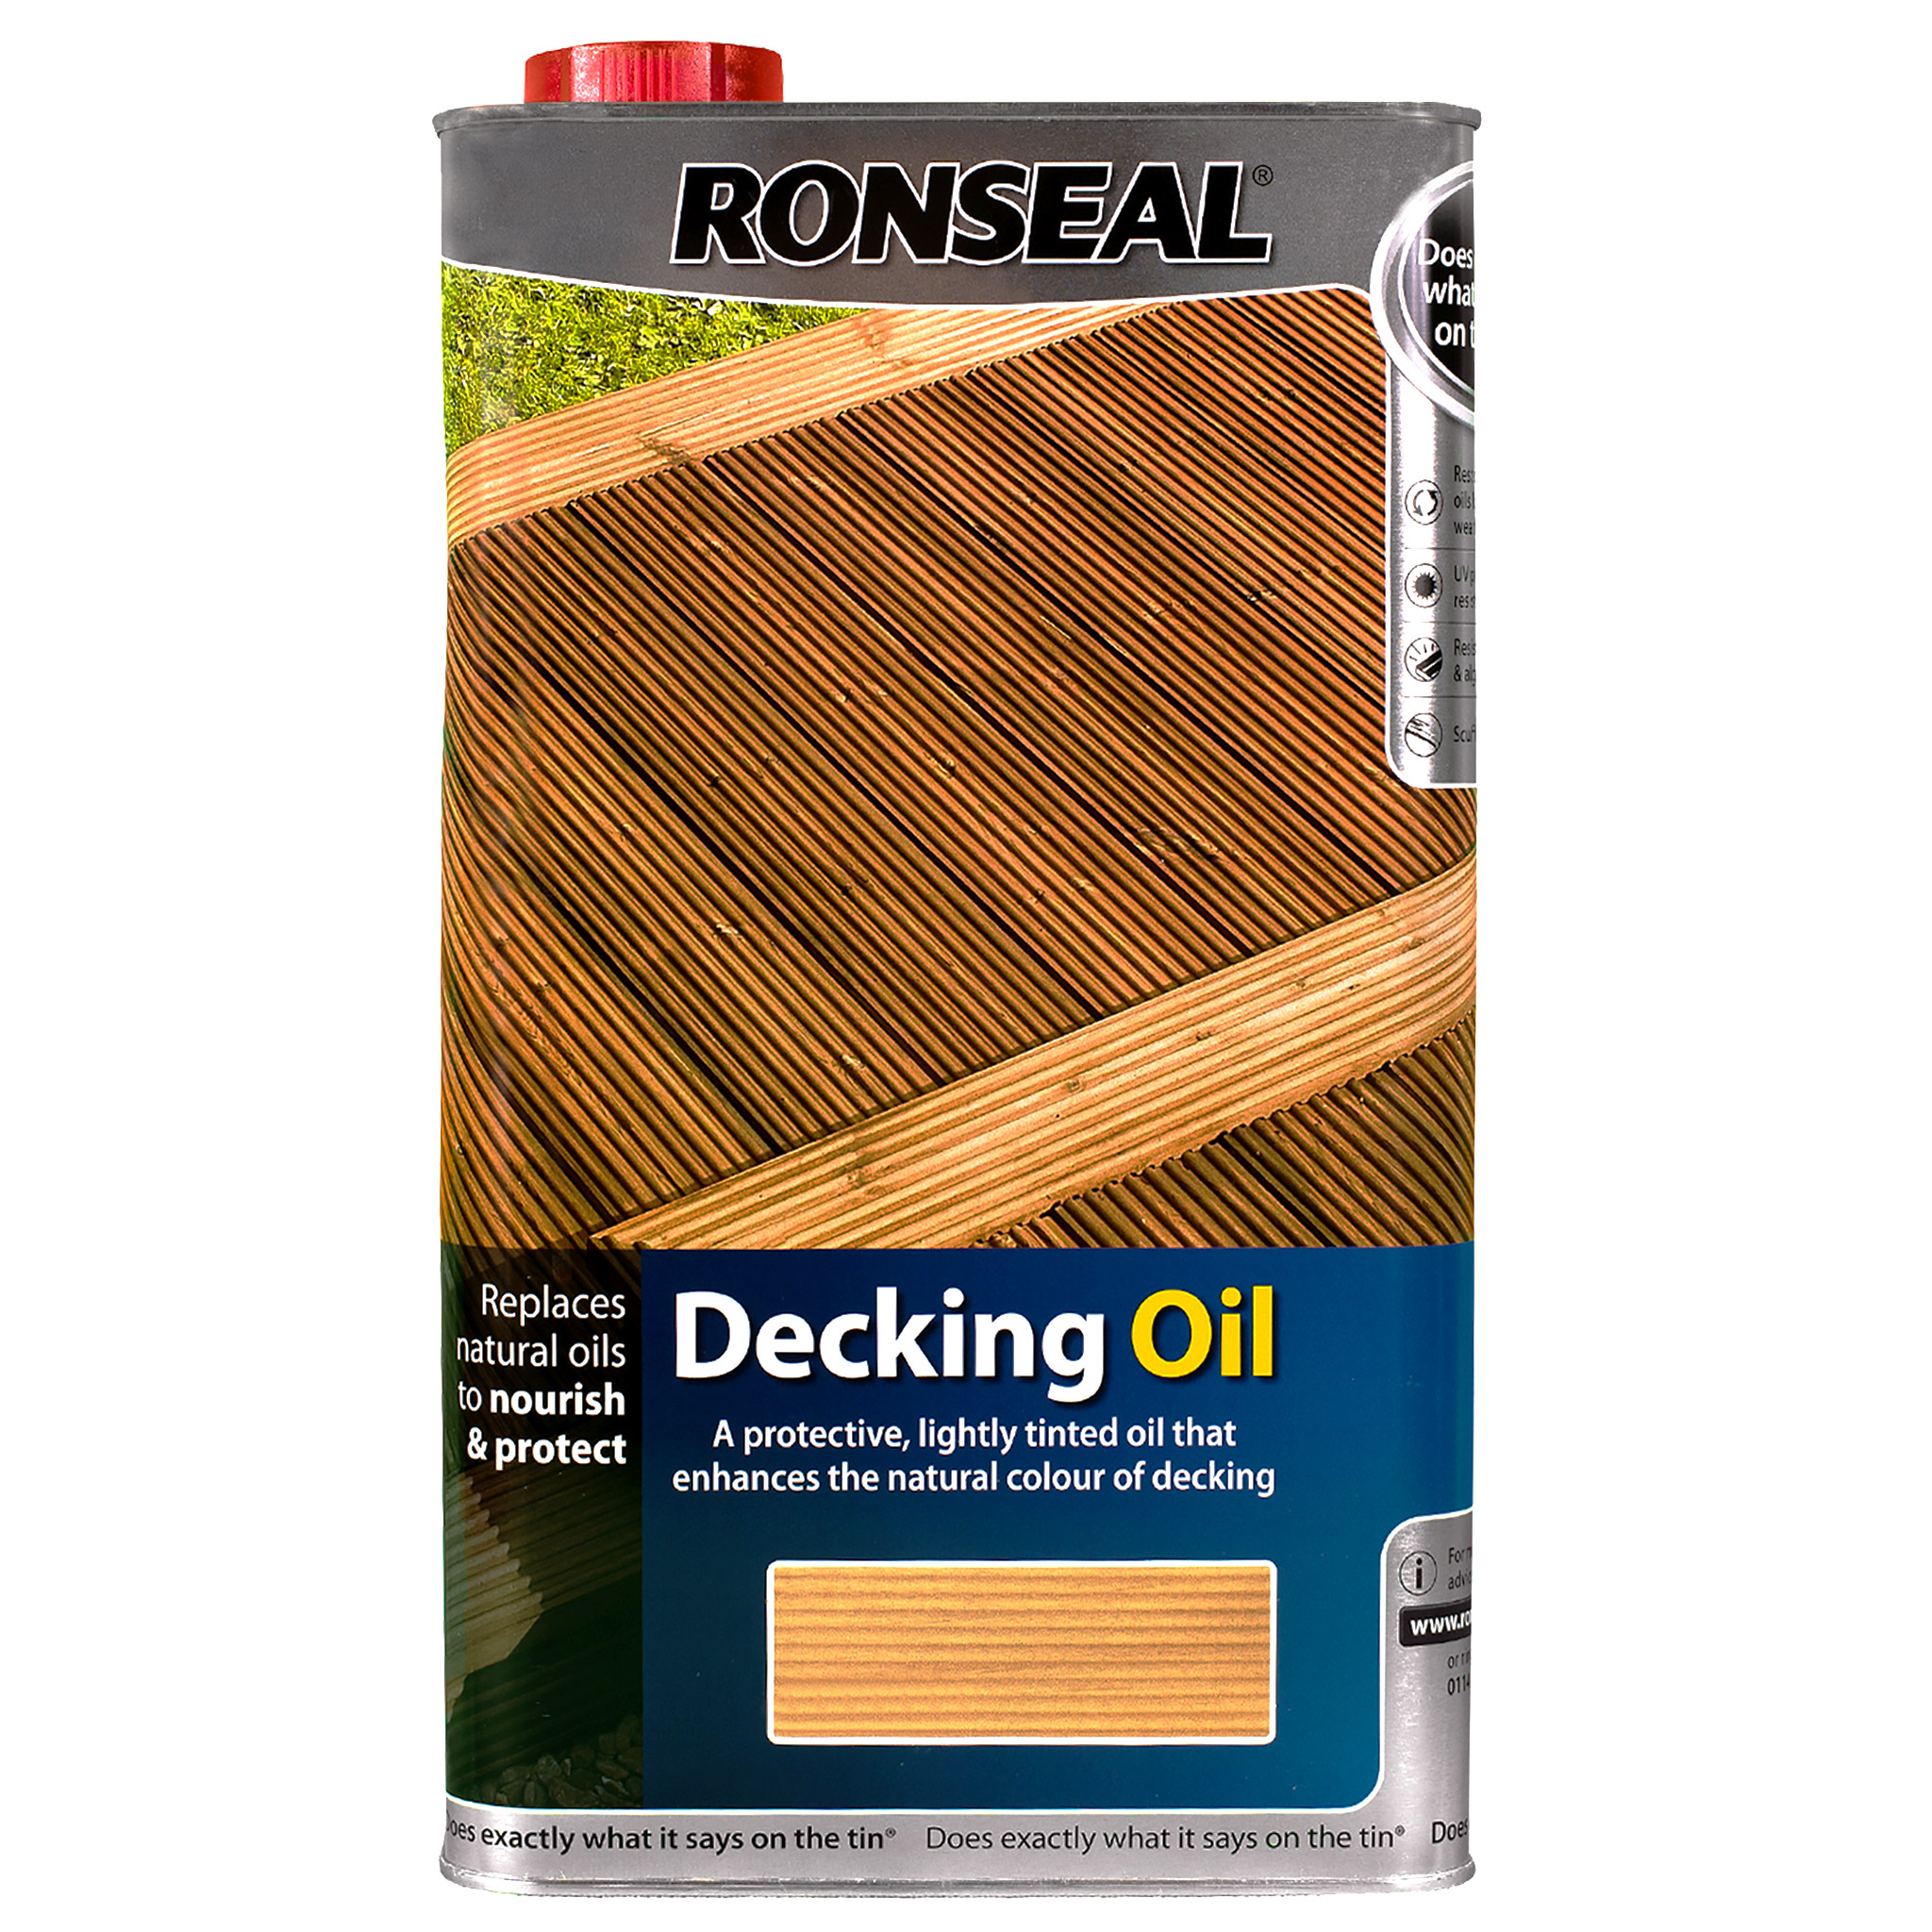 Ronseal Decking Oil Deck Oil For Softwood Hardwood Decks with sizing 2048 X 2048